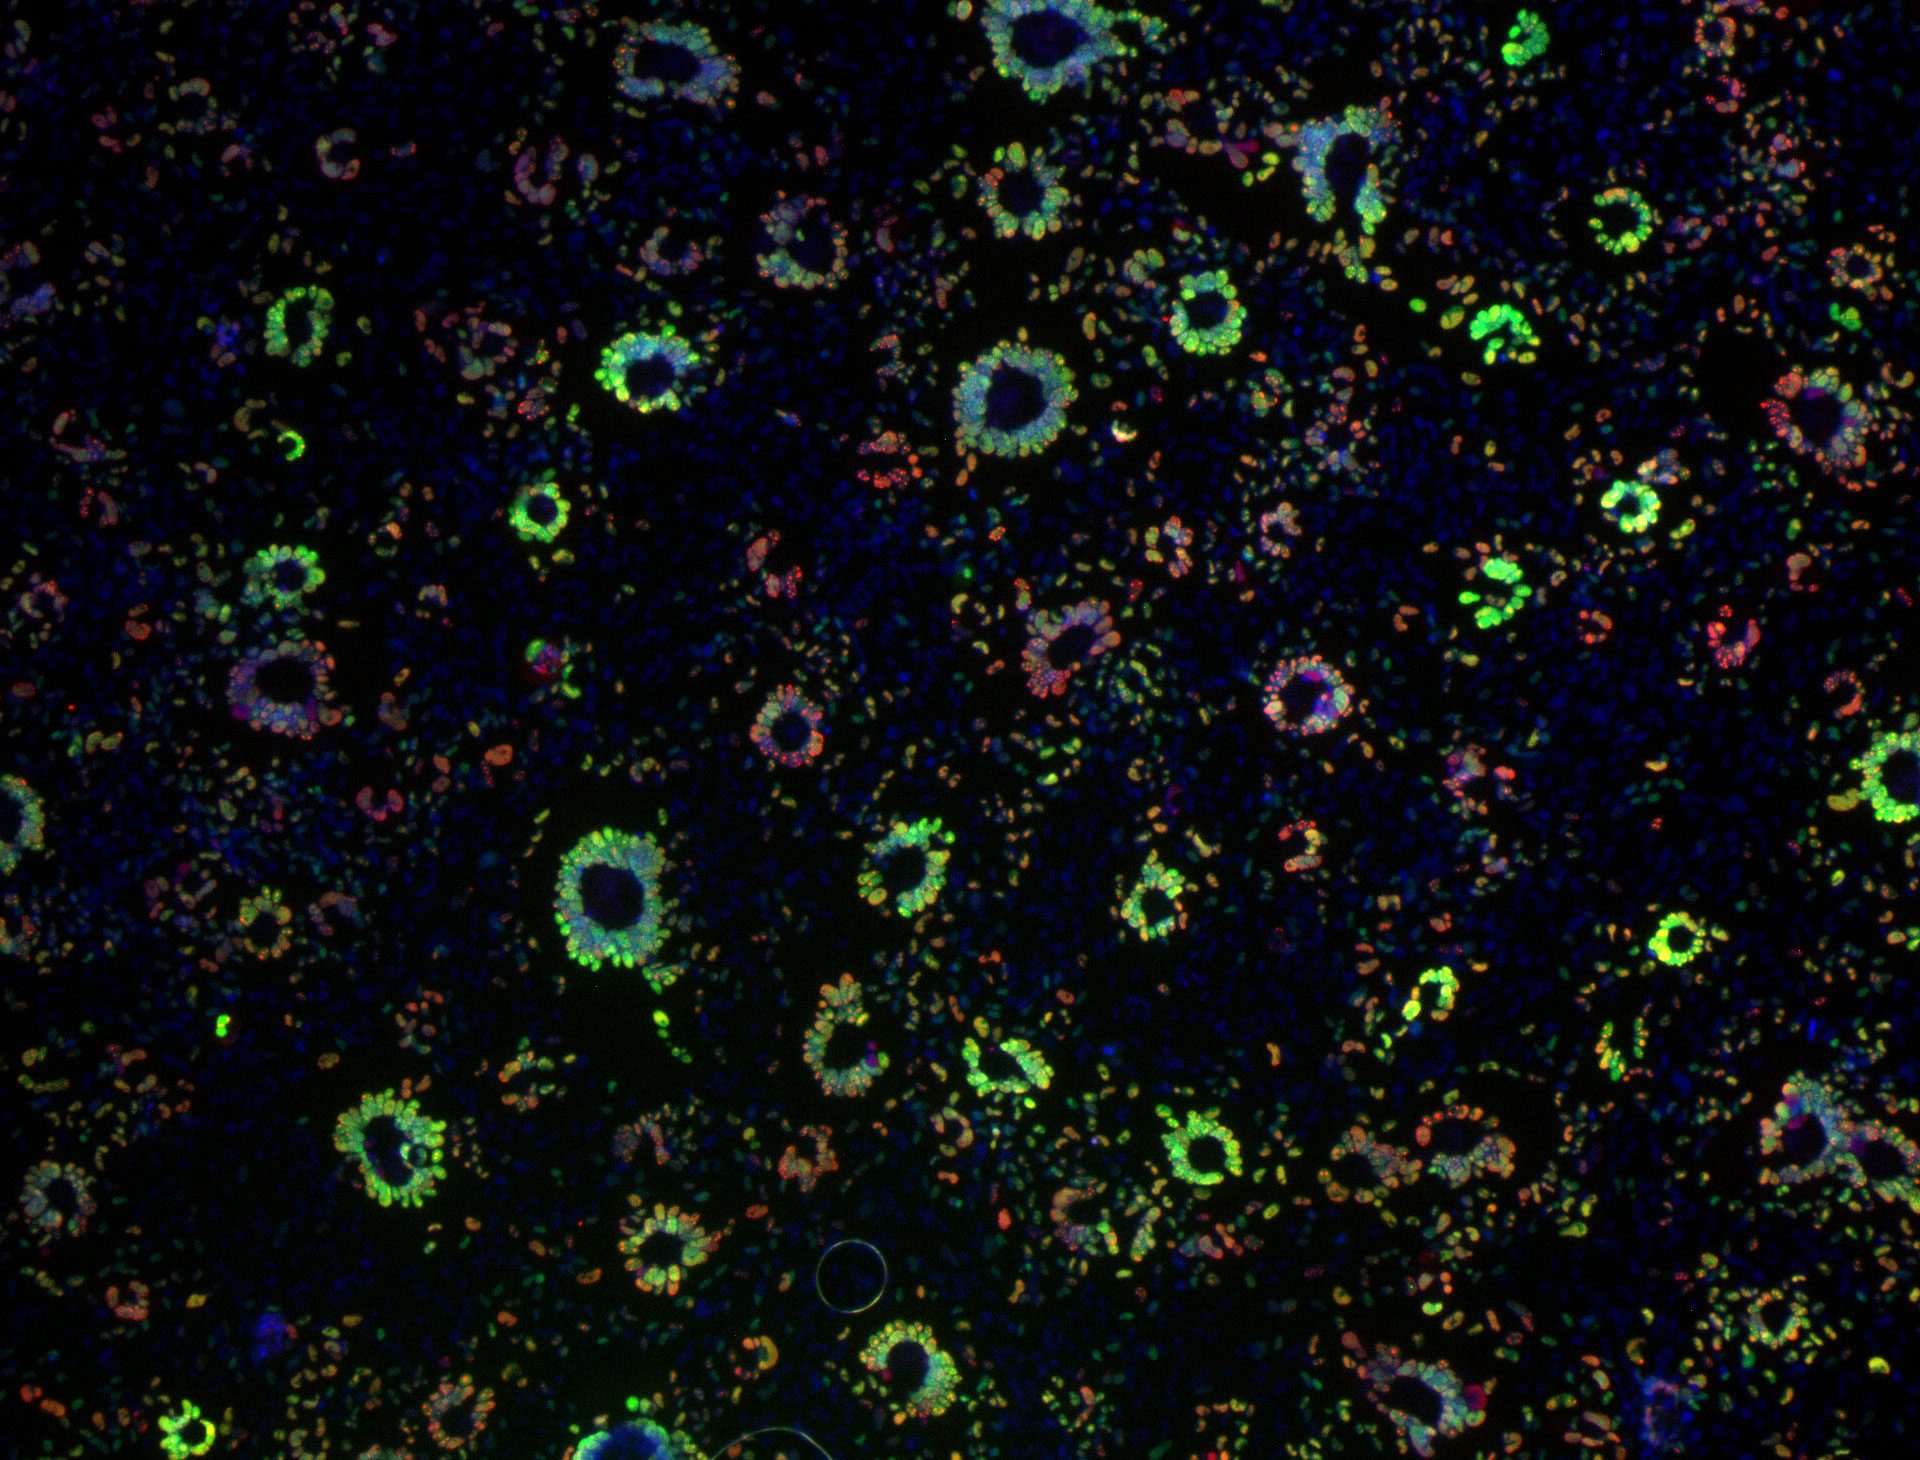 Epithelial cell monolayer (ARPE-19) infected with human cytomegalovirus, costained for viral immediate-early proteins 1/2 (green) and viral single-stranded DNA binding protein UL57 (red). Nuclei are stained with Hoechst 33342 (blue). See Vo, M., A. Aguiar, M.A. McVoy, and L. Hertel. 2020. Cytomegalovirus Strain TB40/E Restrictions and Adaptations to Growth in ARPE-19 Epithelial Cells. Microorganisms 8:E615. doi: 10.3390/microorganisms8040615. Courtesy of Alexis Aguiar and Laura Hertel, UC San Francisco.